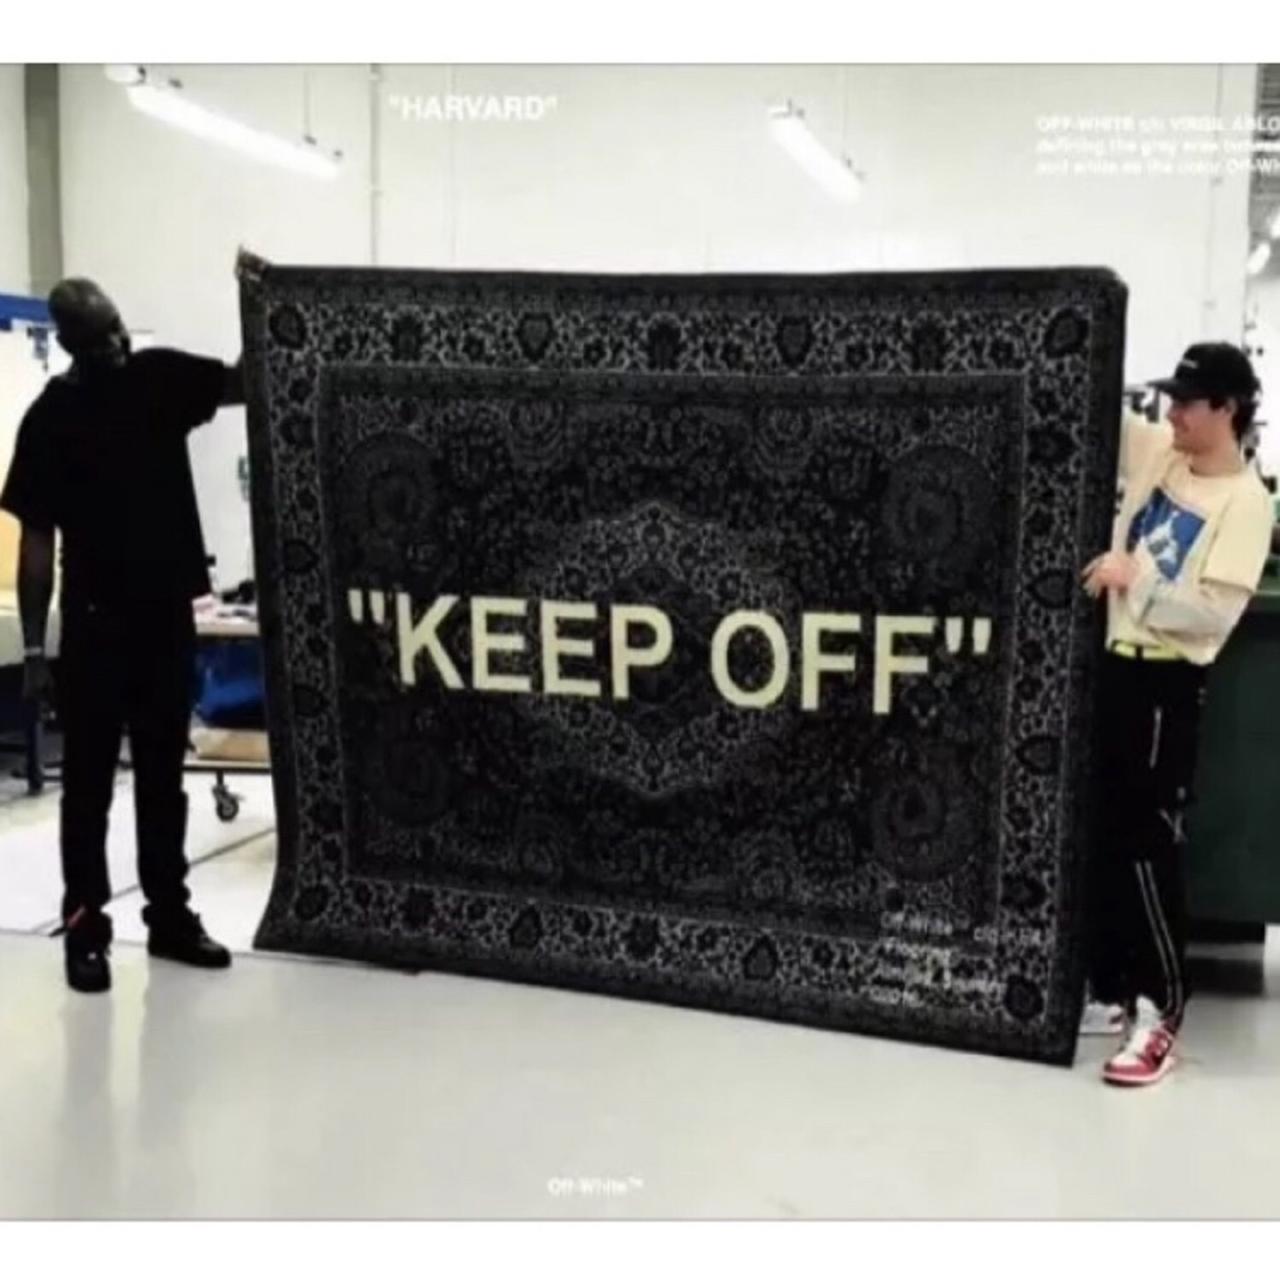 Virgil Abloh's Ikea Collection Includes a Door Stop and an Unwelcoming Rug  